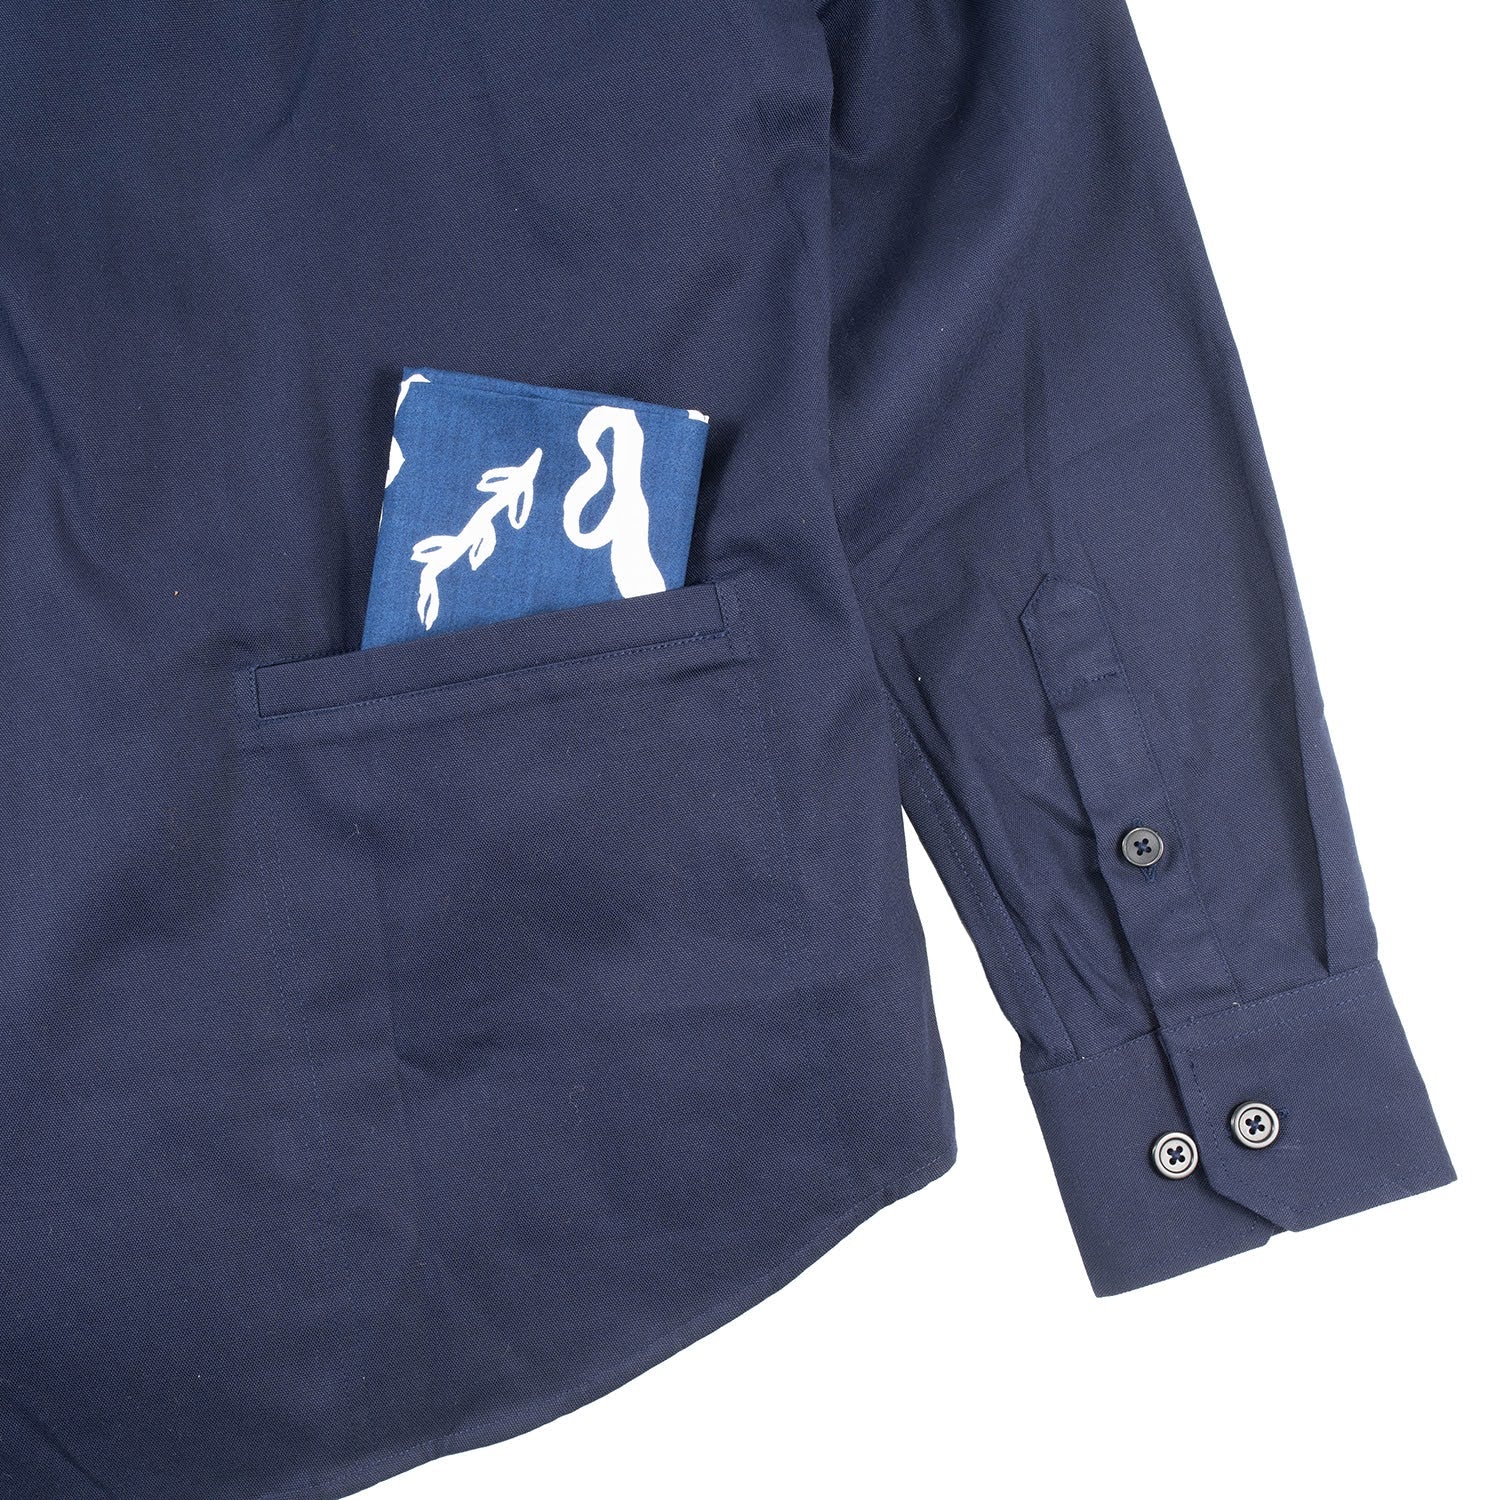 PRODUCT OF BOB SCALES Light Weight Canvas Utility Shirt